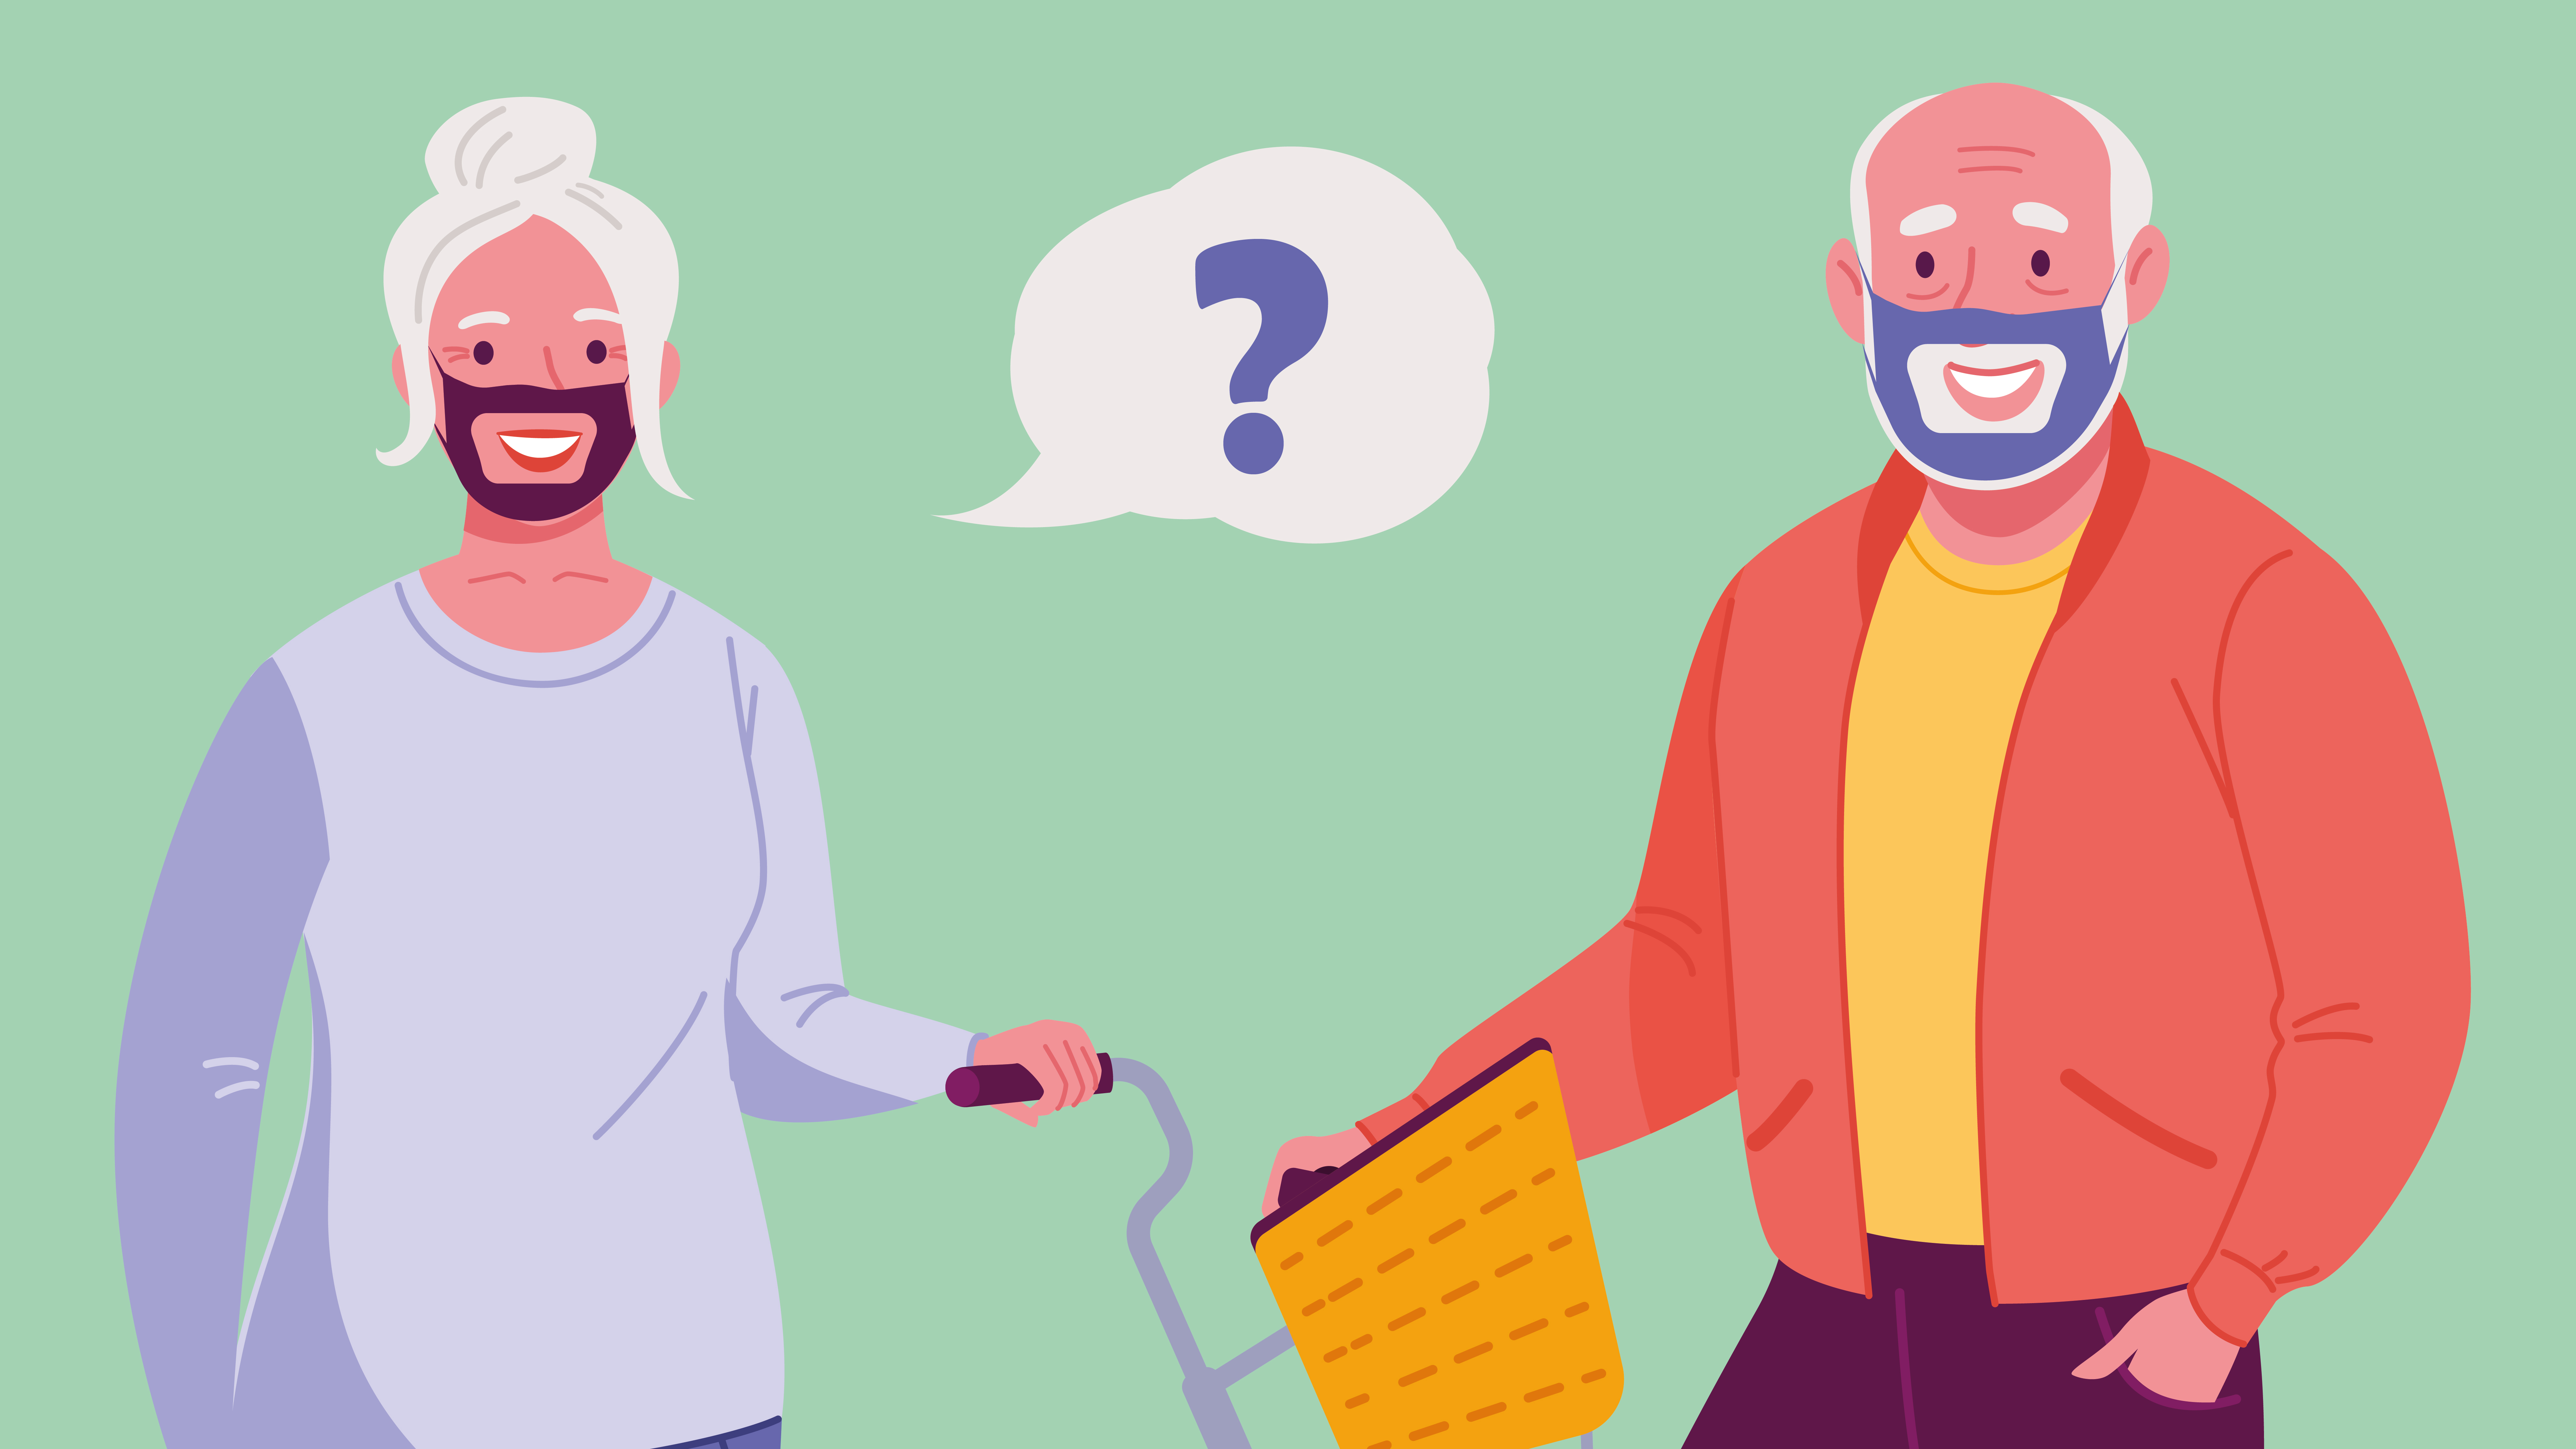 Two older people with a bike and a speech bubble with a question mark,and the image links to a blog post